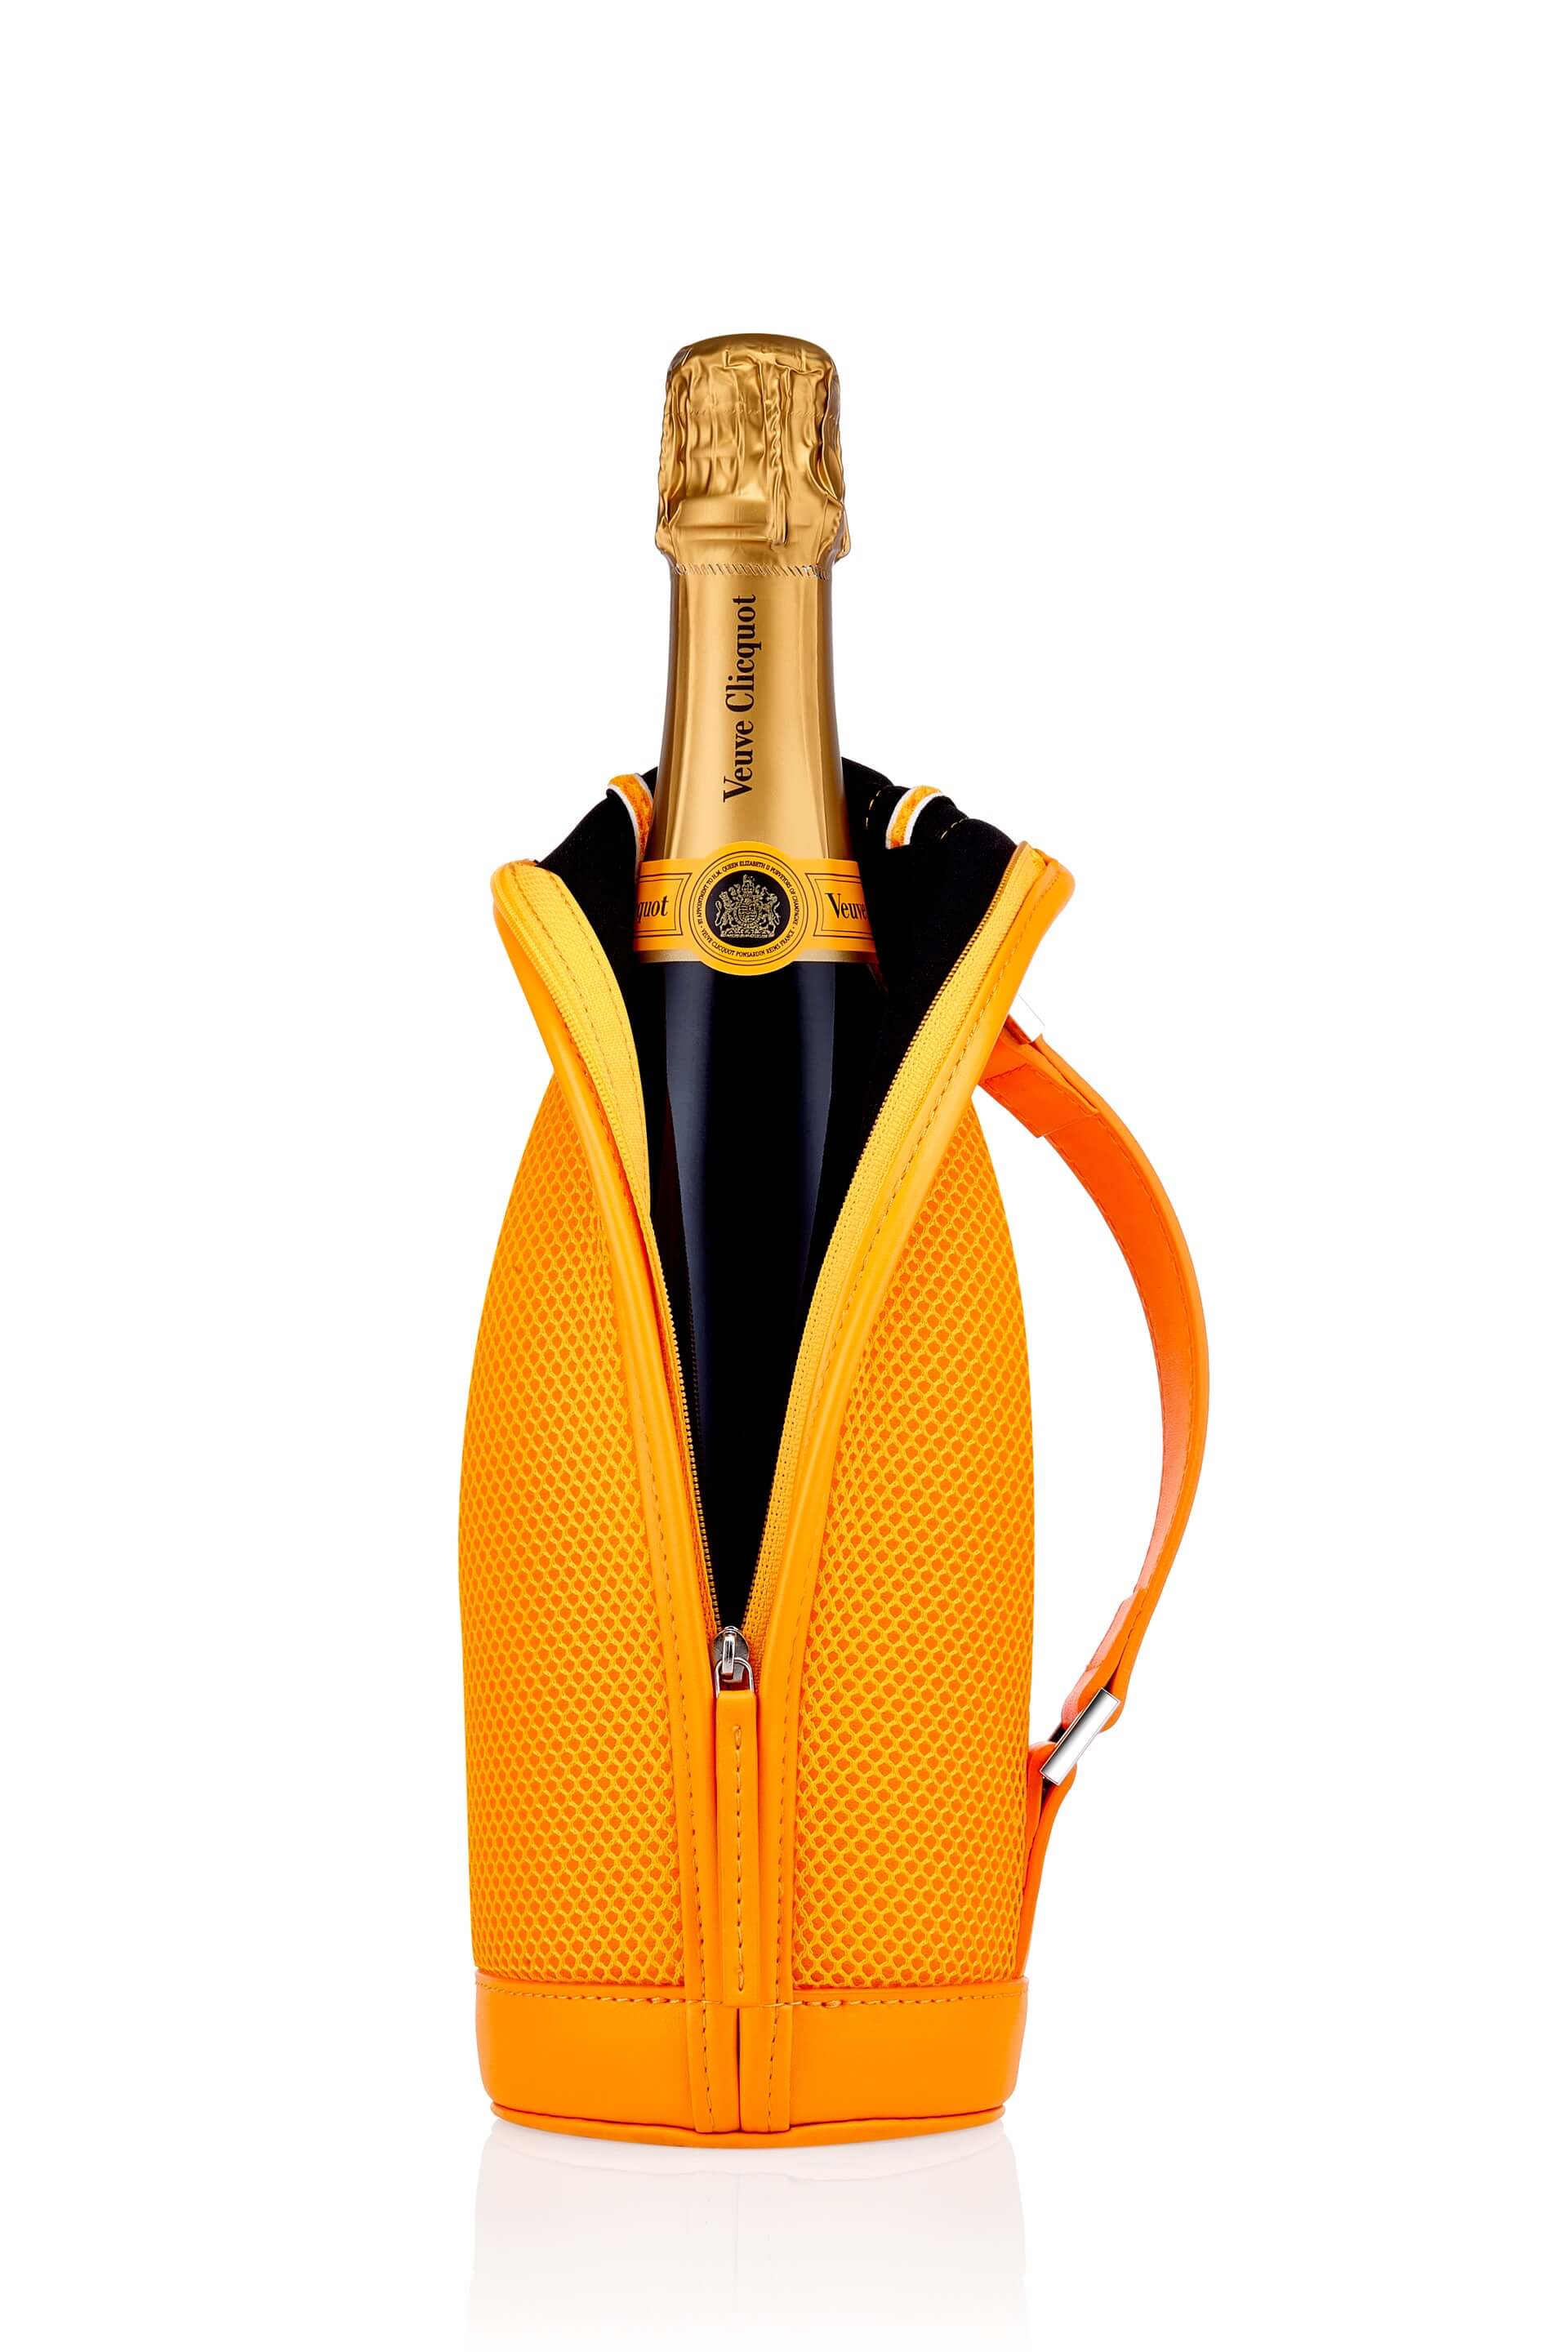 Veuve Clicquot Yellow Label Champagne with Ice Jacket 